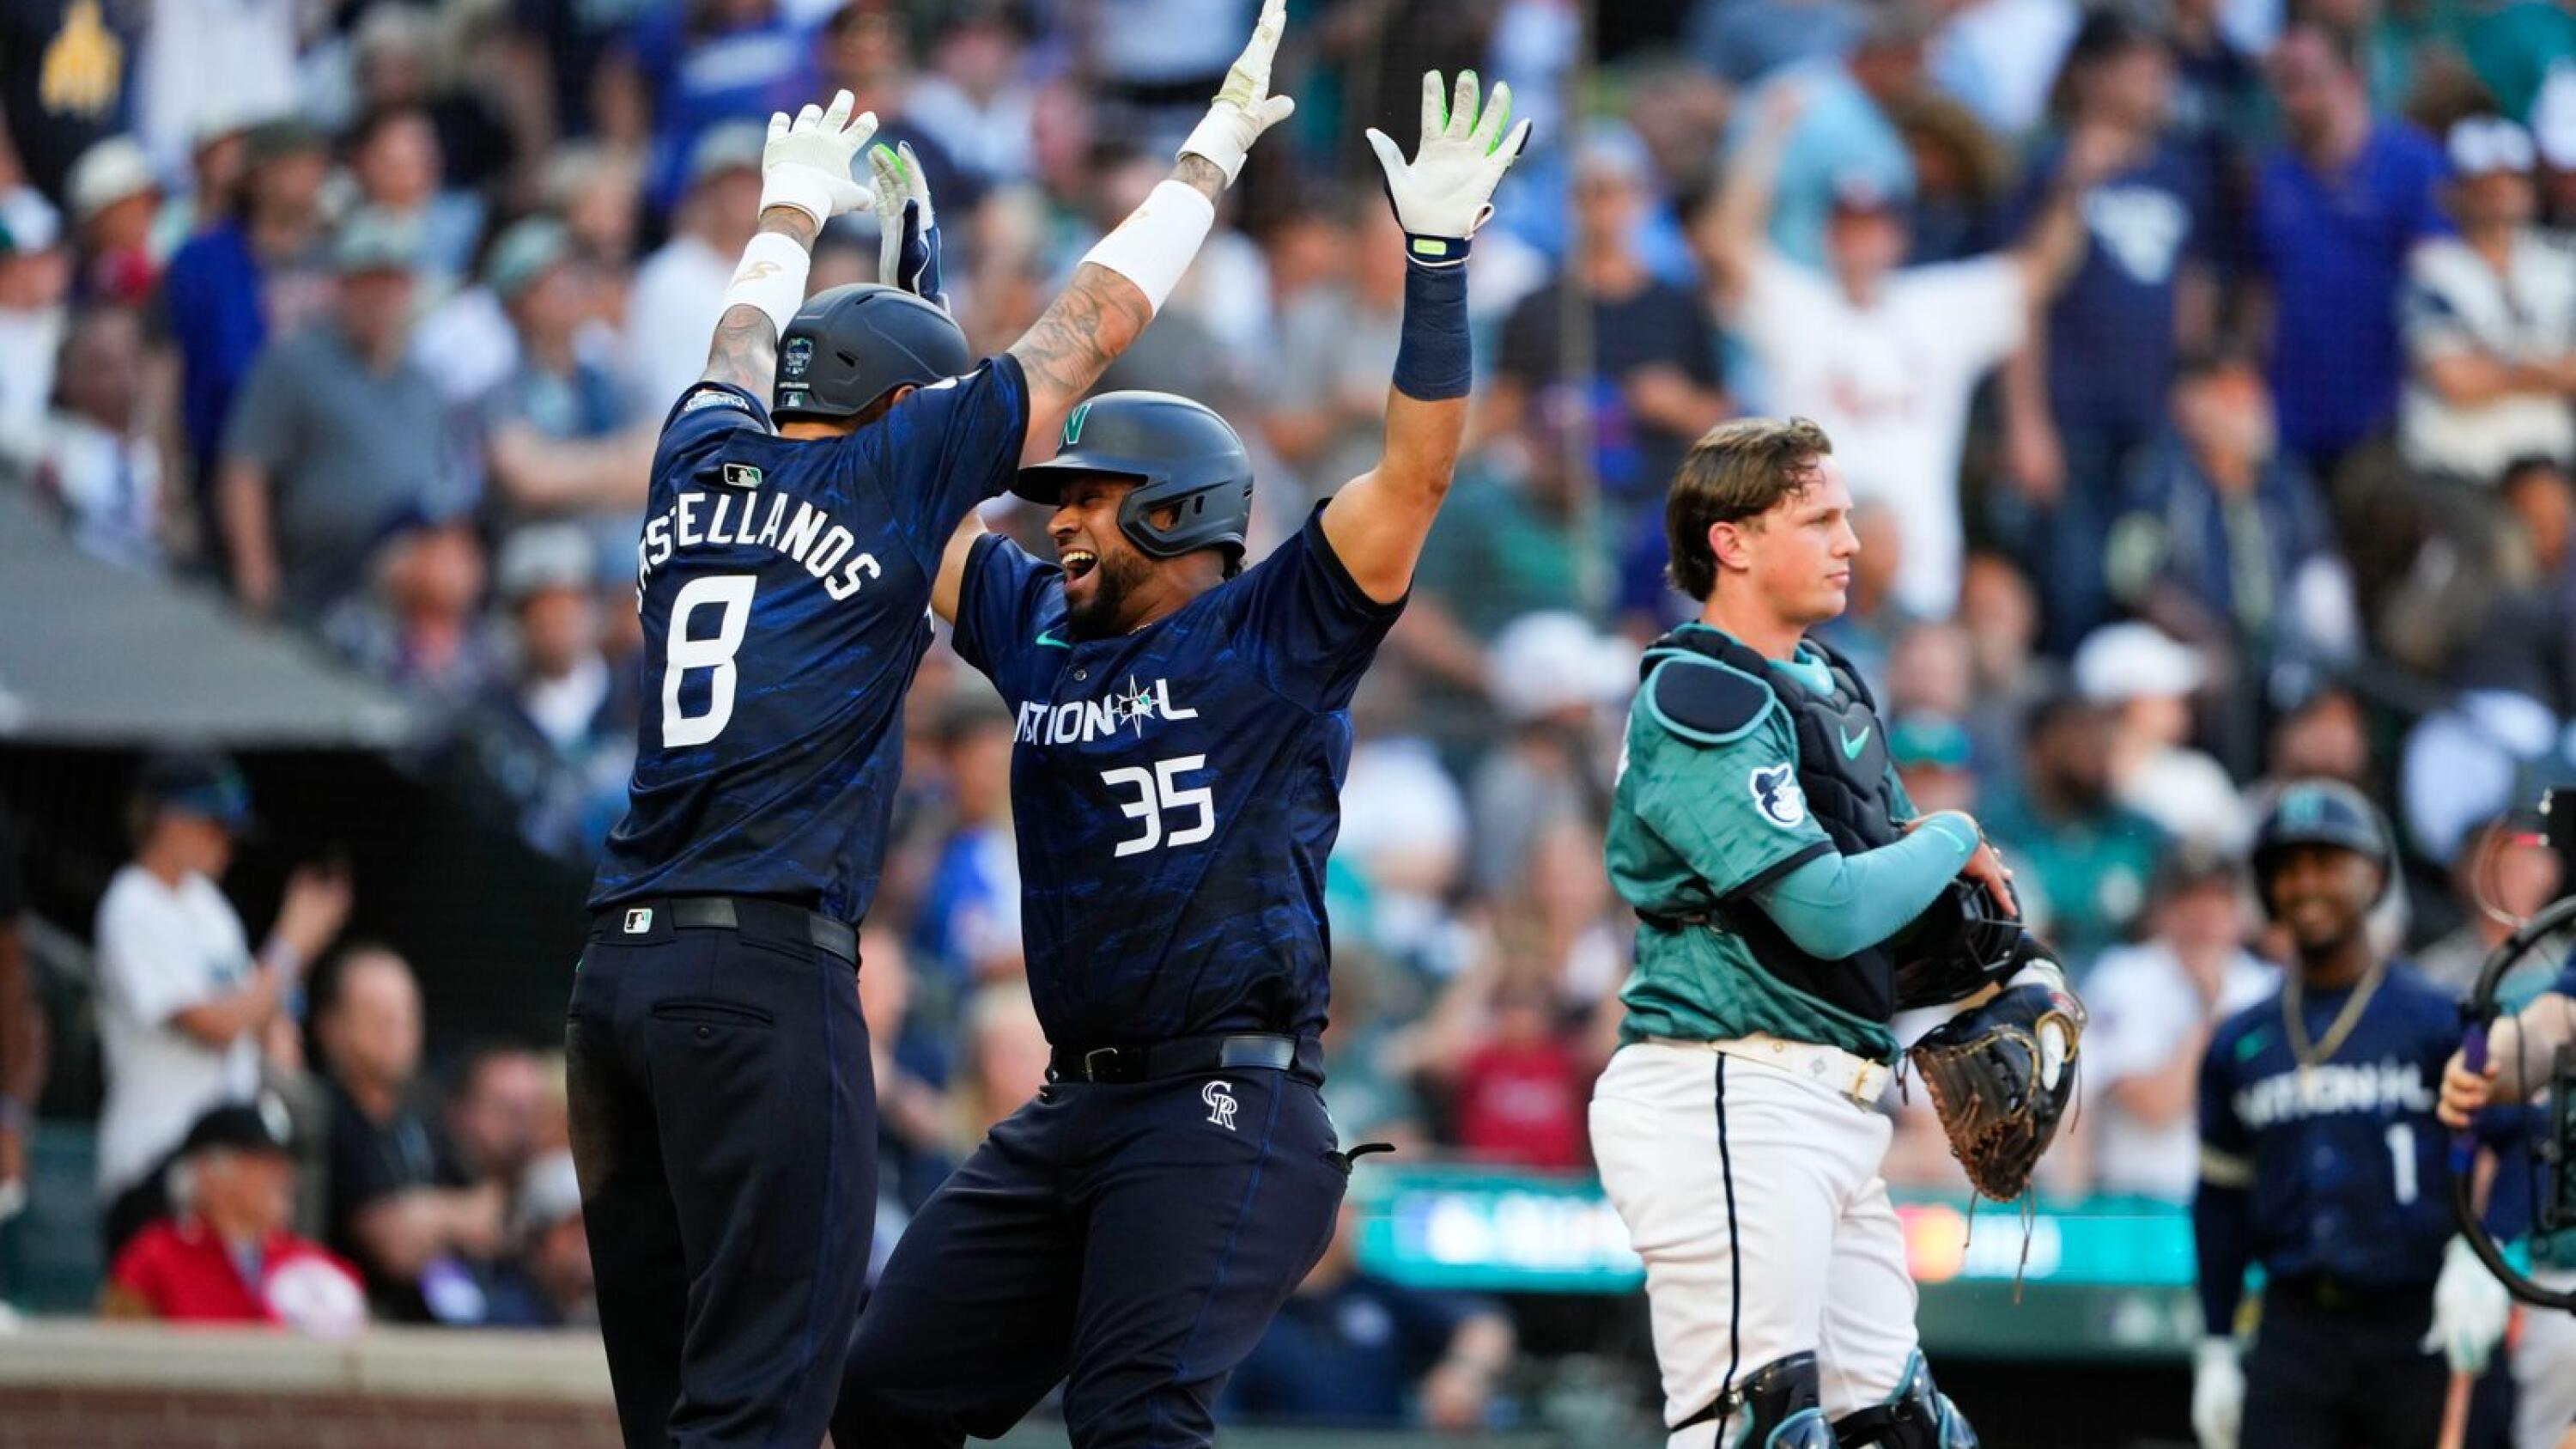 Homers carry American League to 3-2 victory in All-Star Game with